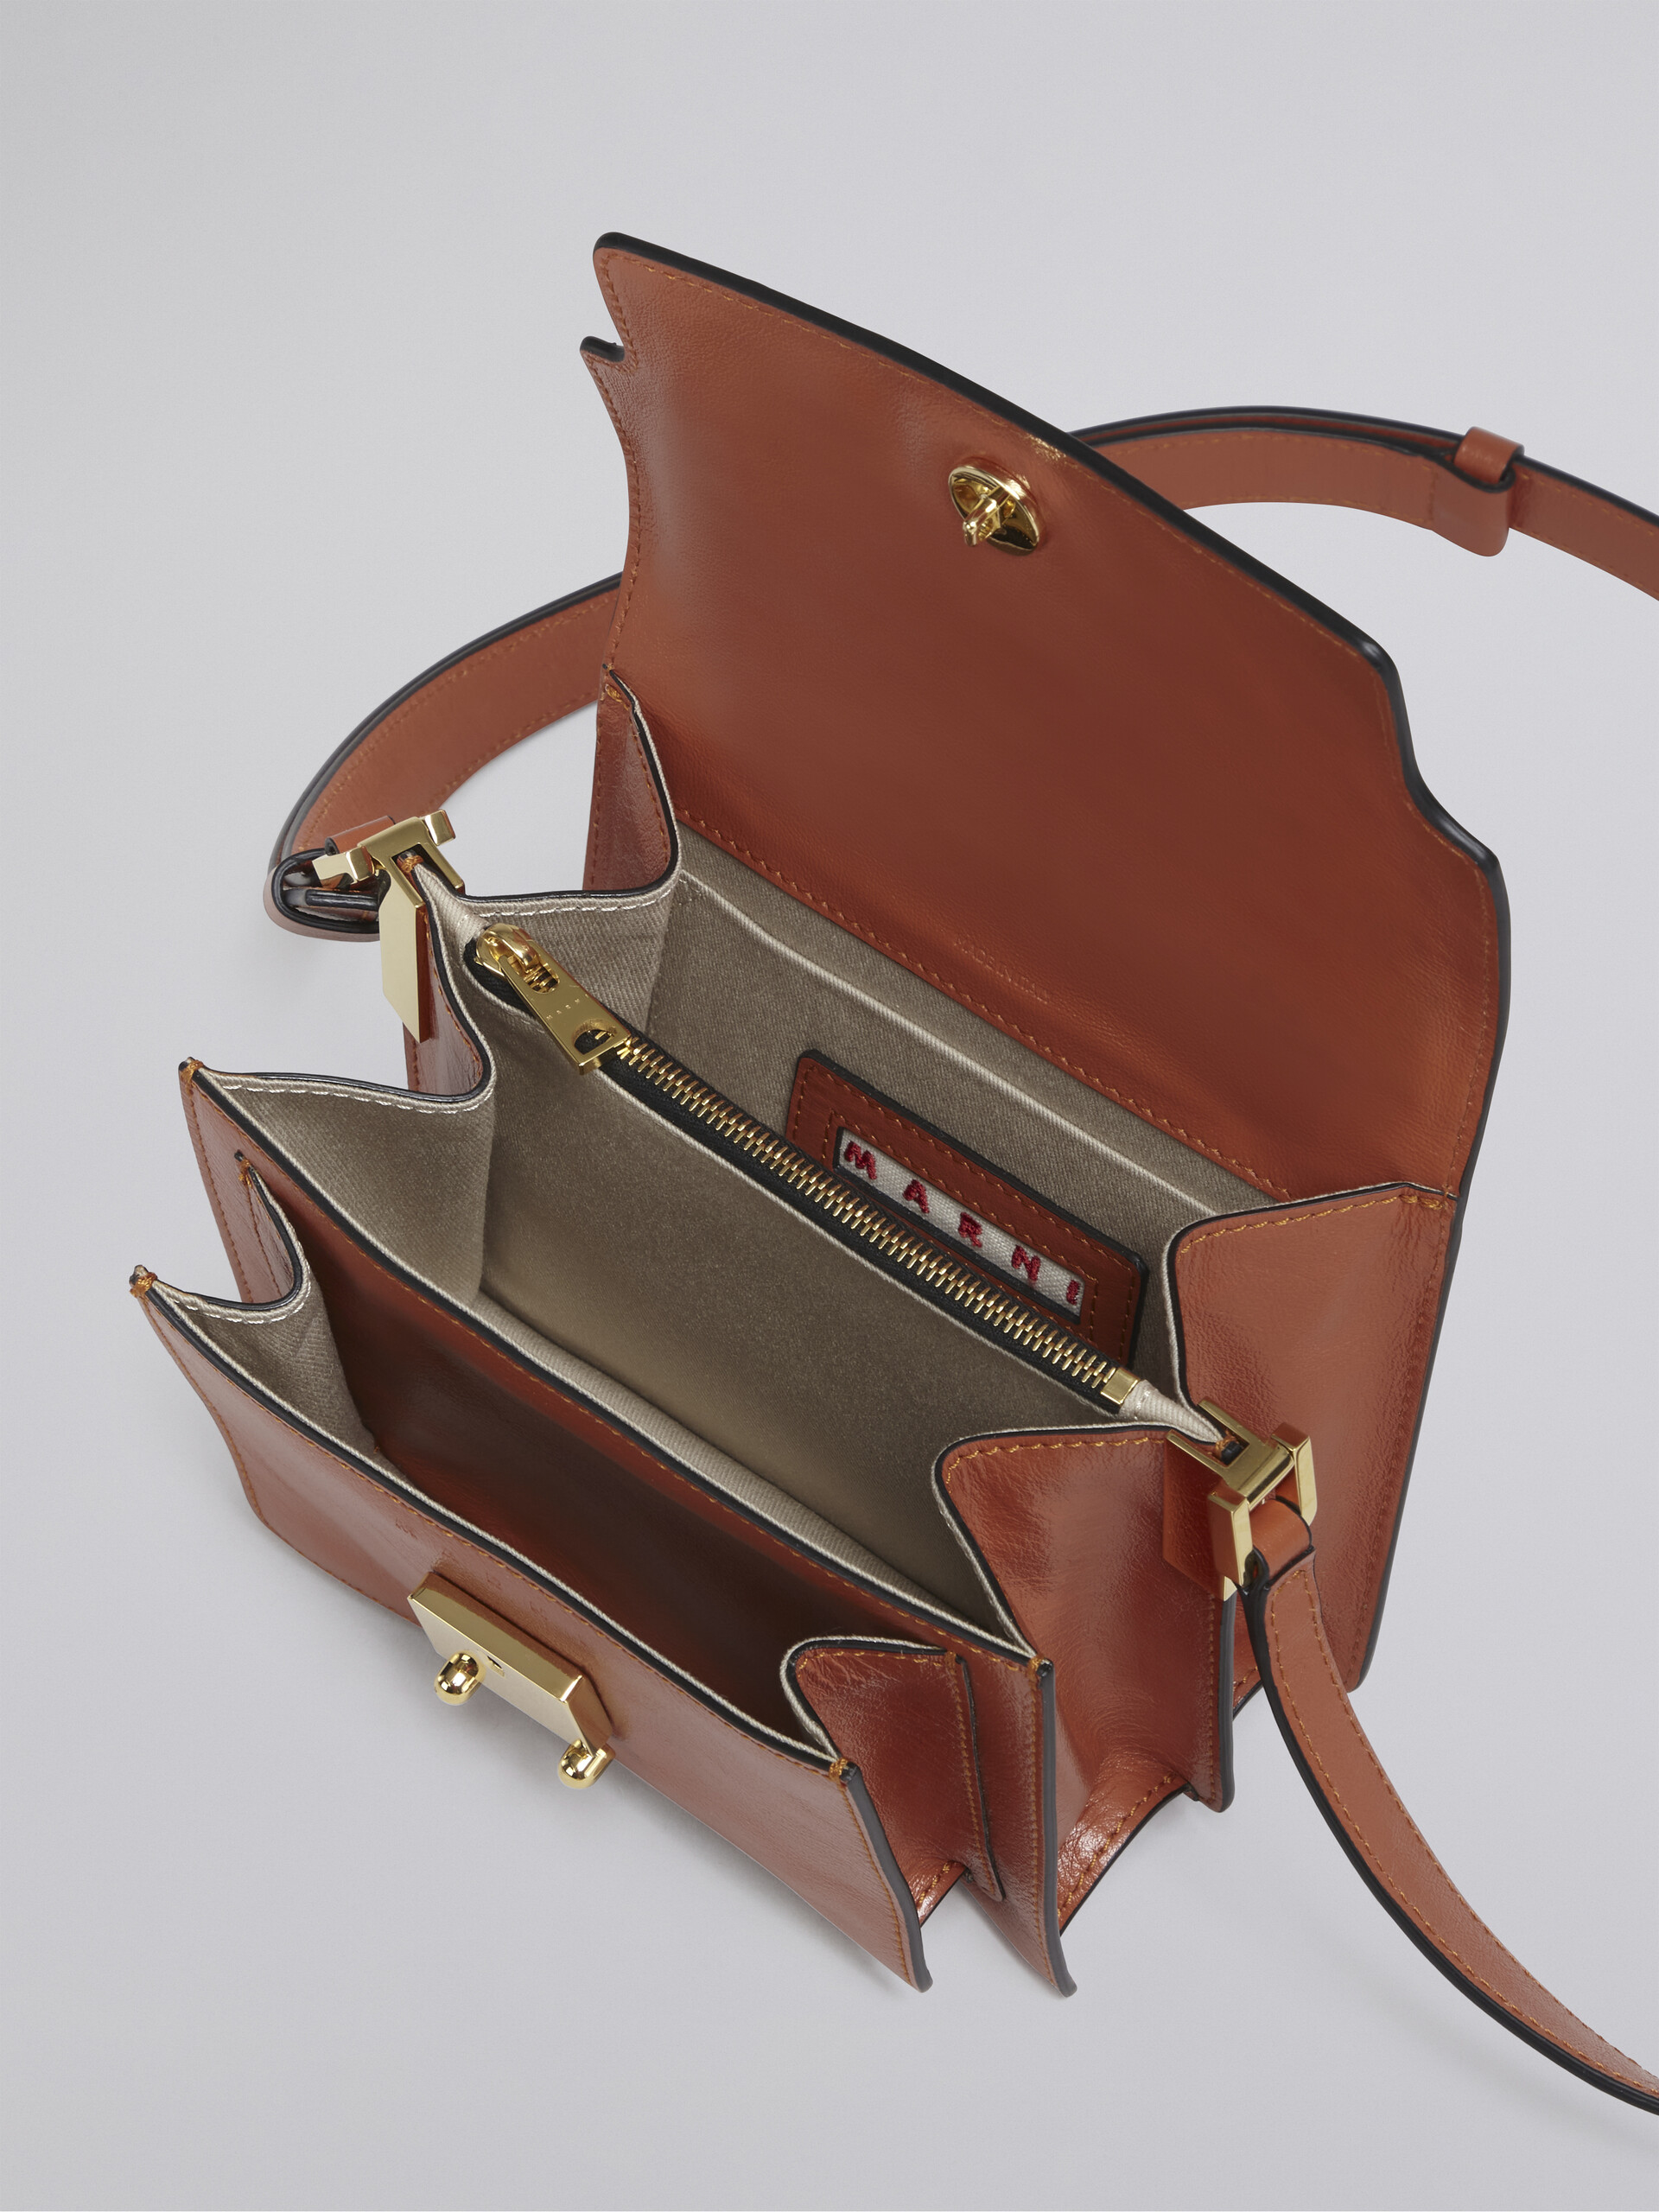 TRUNK SOFT mini bag in brown leather - Shoulder Bags - Image 4